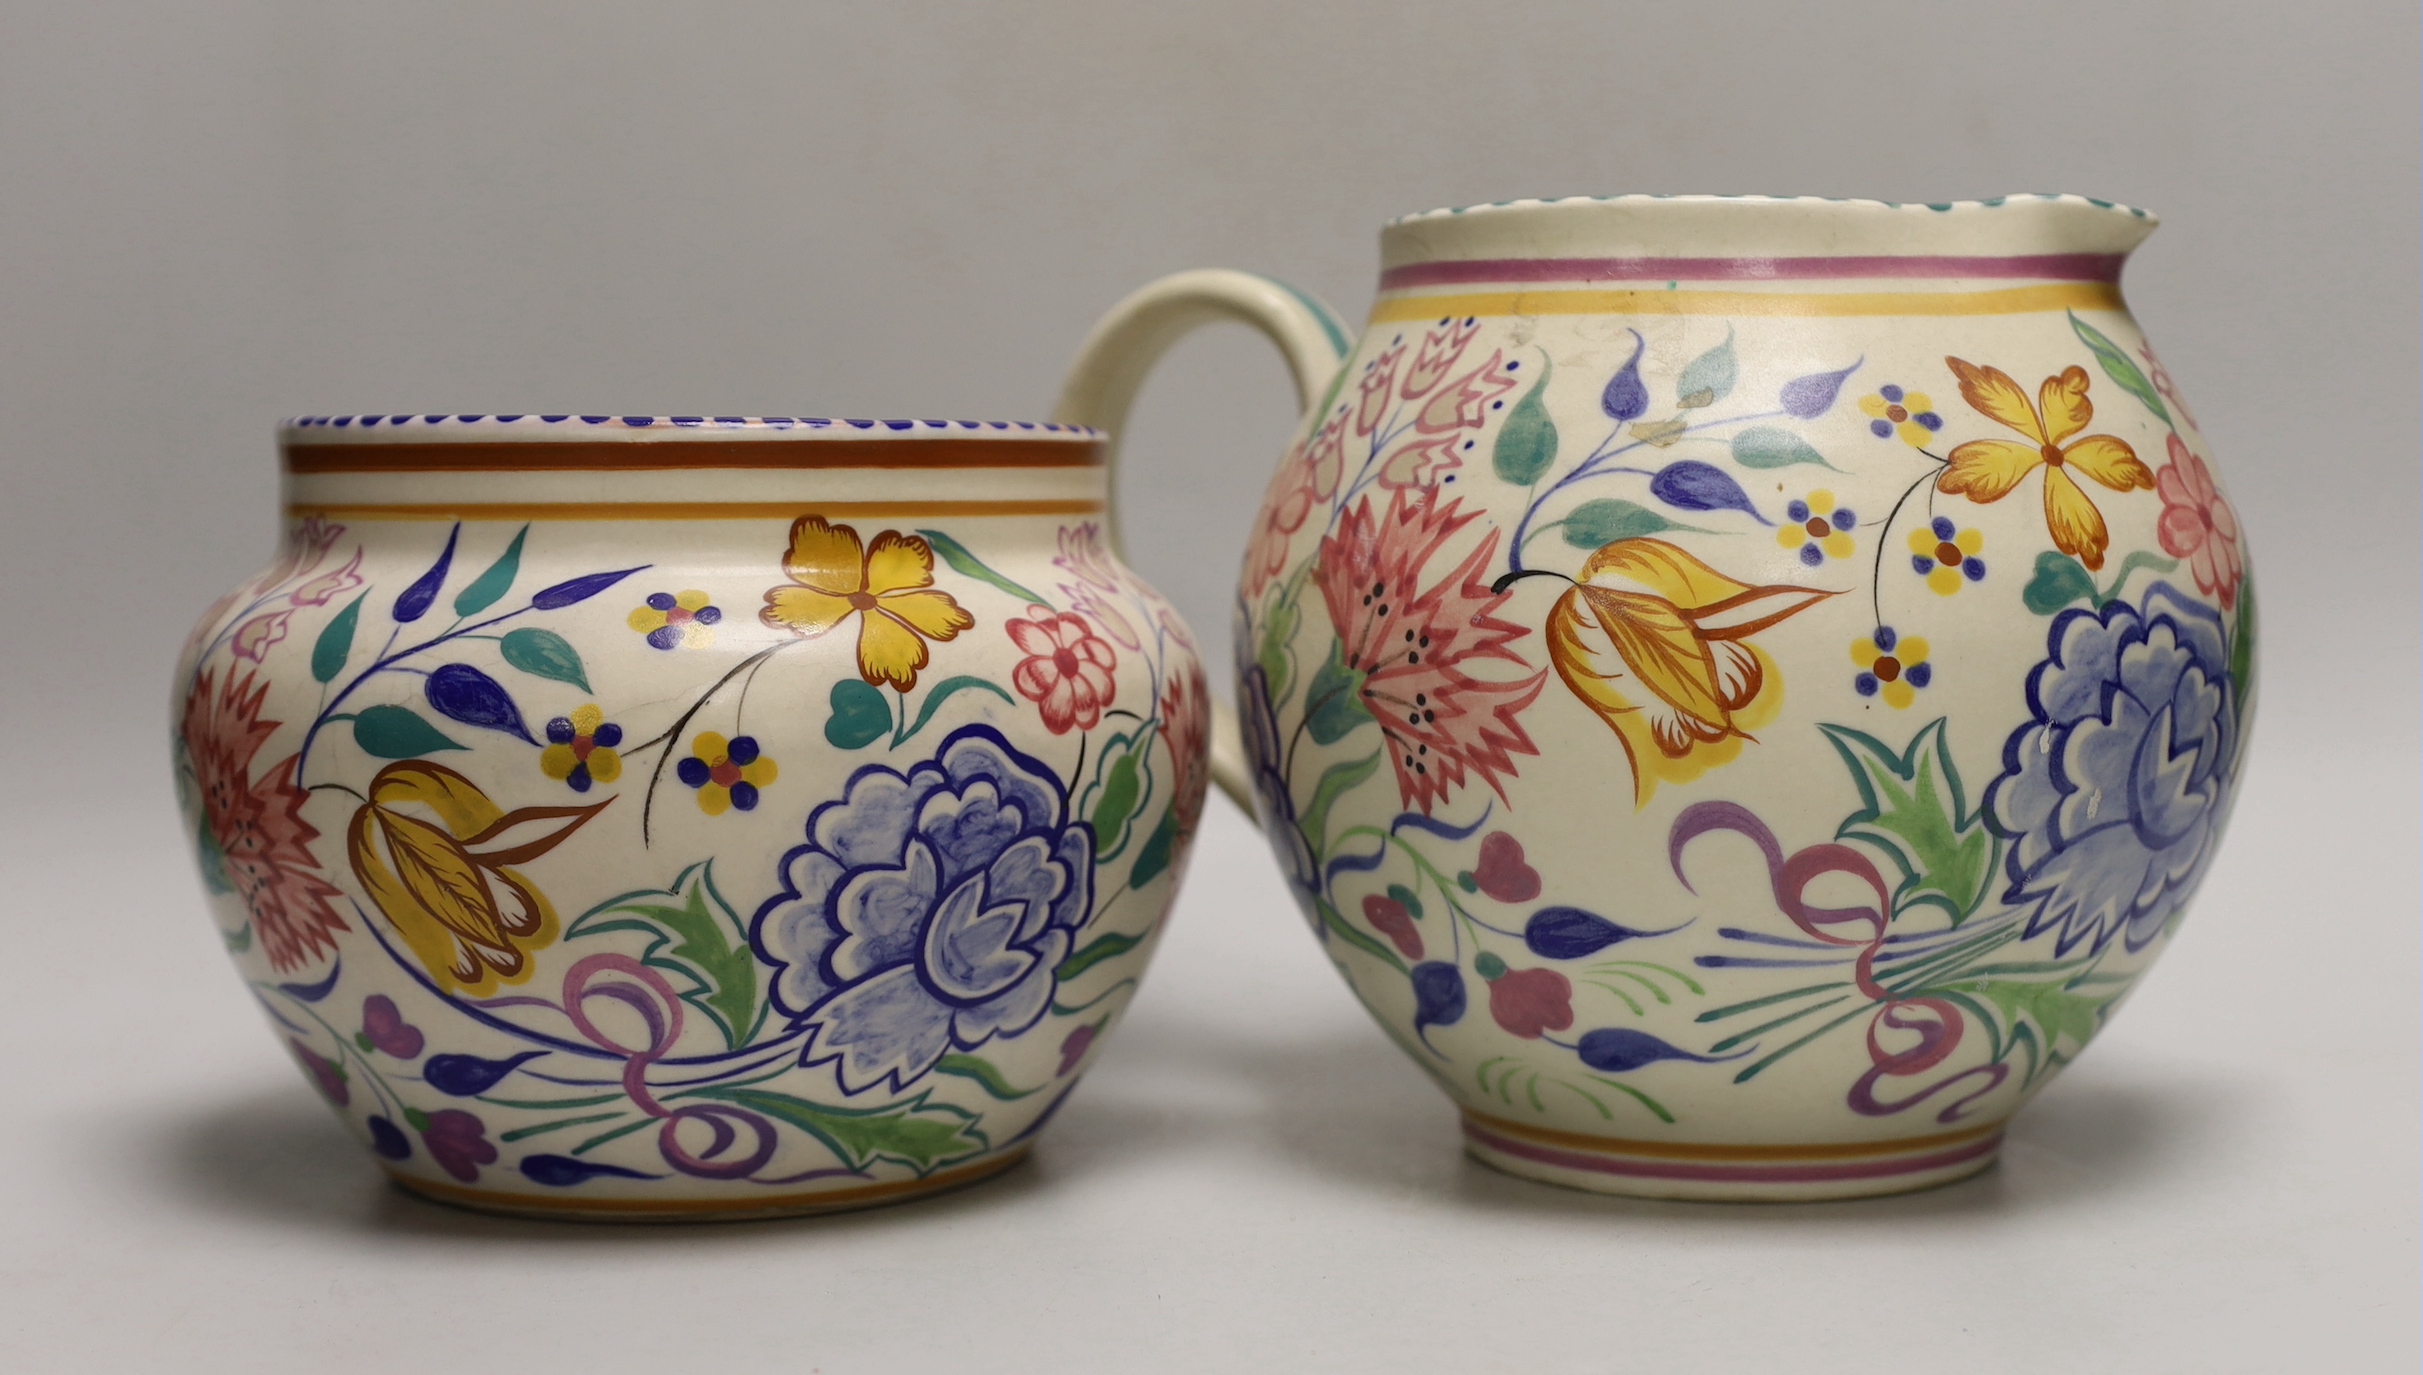 A Poole pottery tulip floral vase and jug and an hors d'oeuvre dish